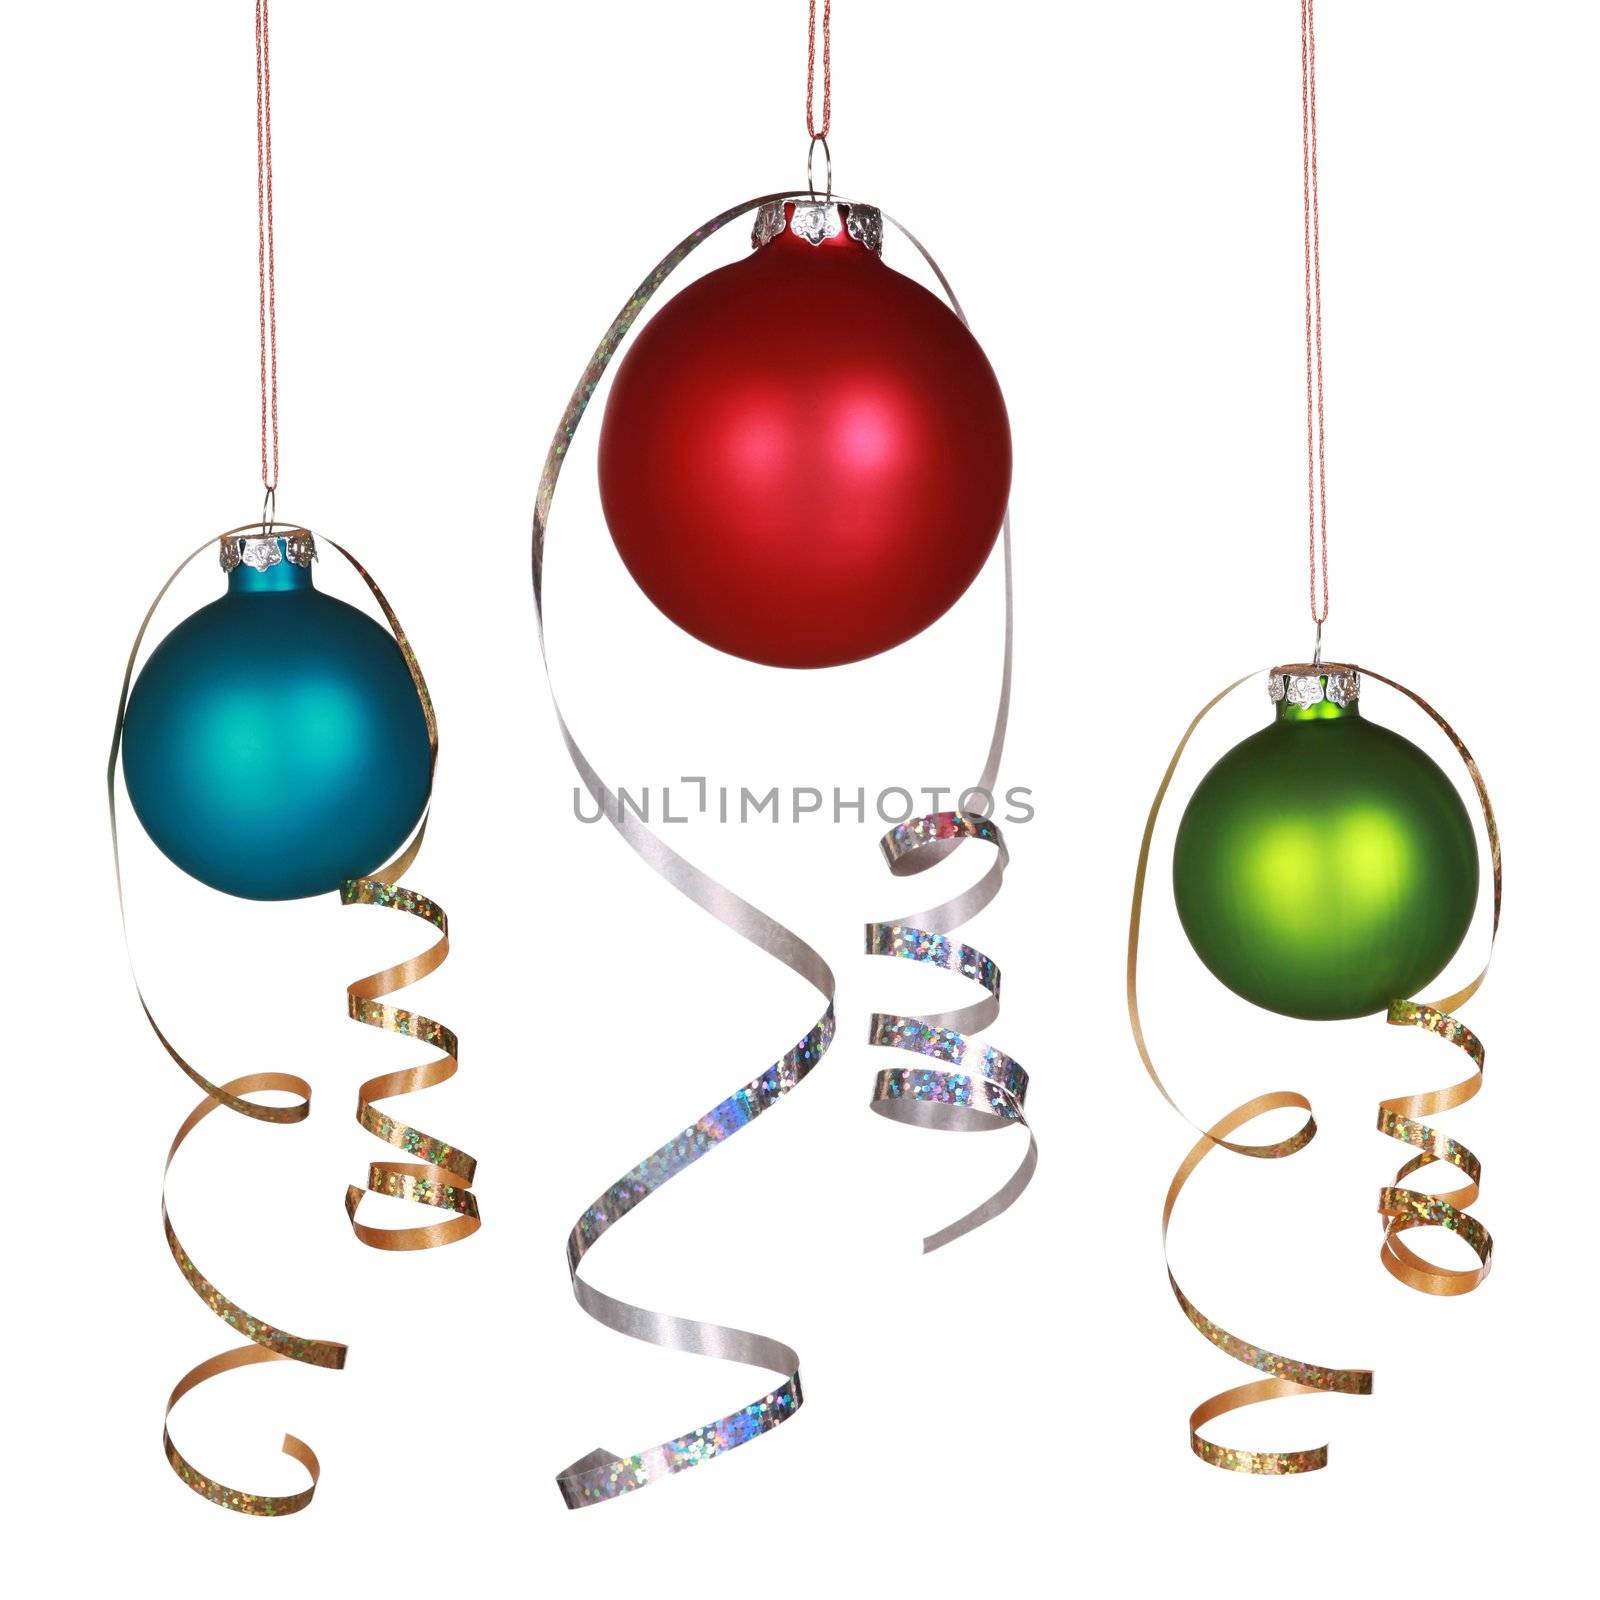 Three Christmas ornaments with gold and silver ribbons isolated on white